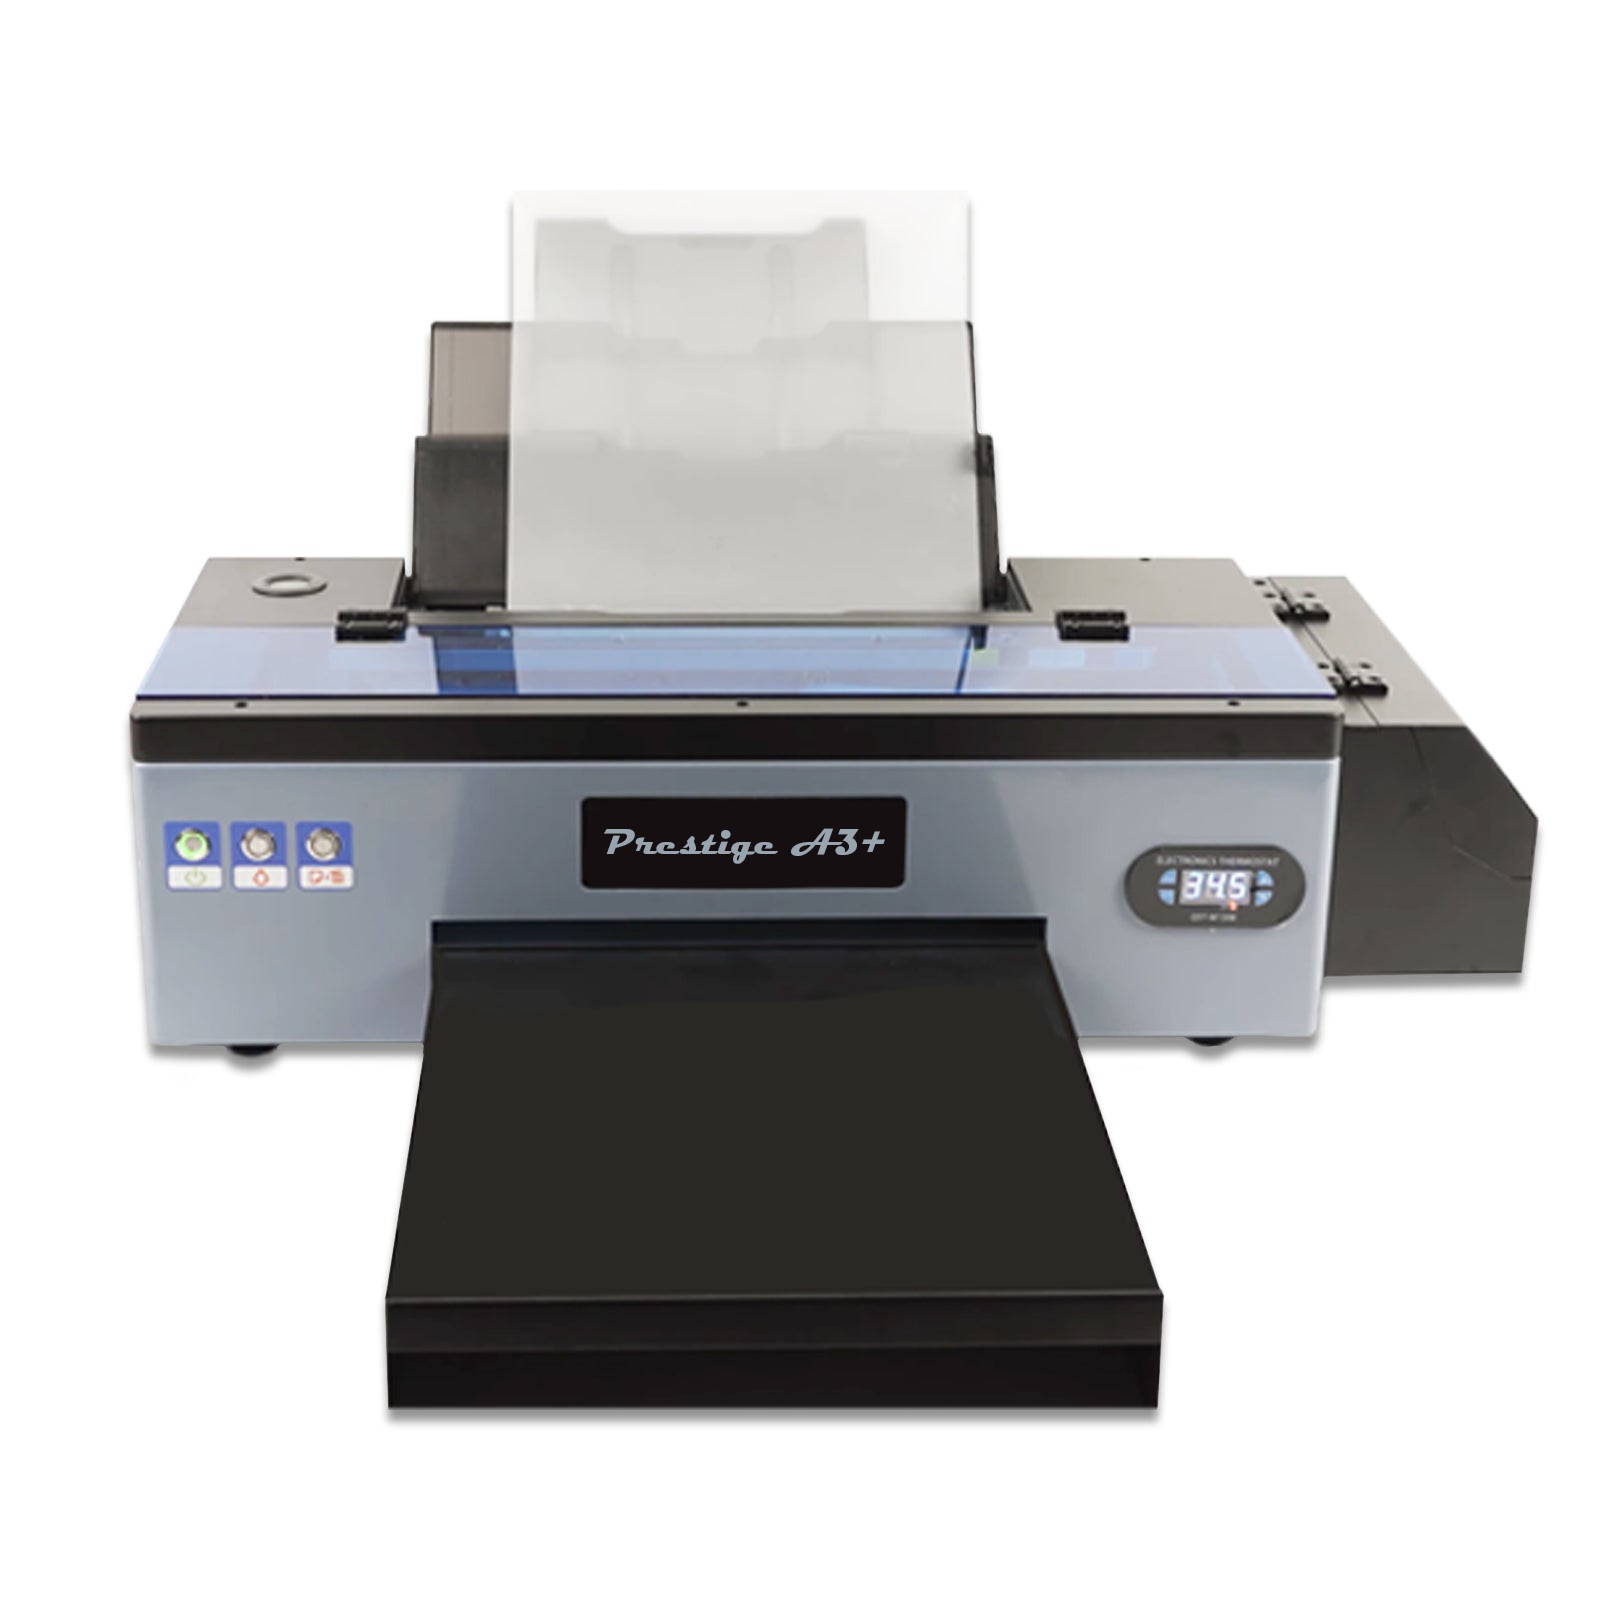 Prestige A3+ Printer for DTF front view